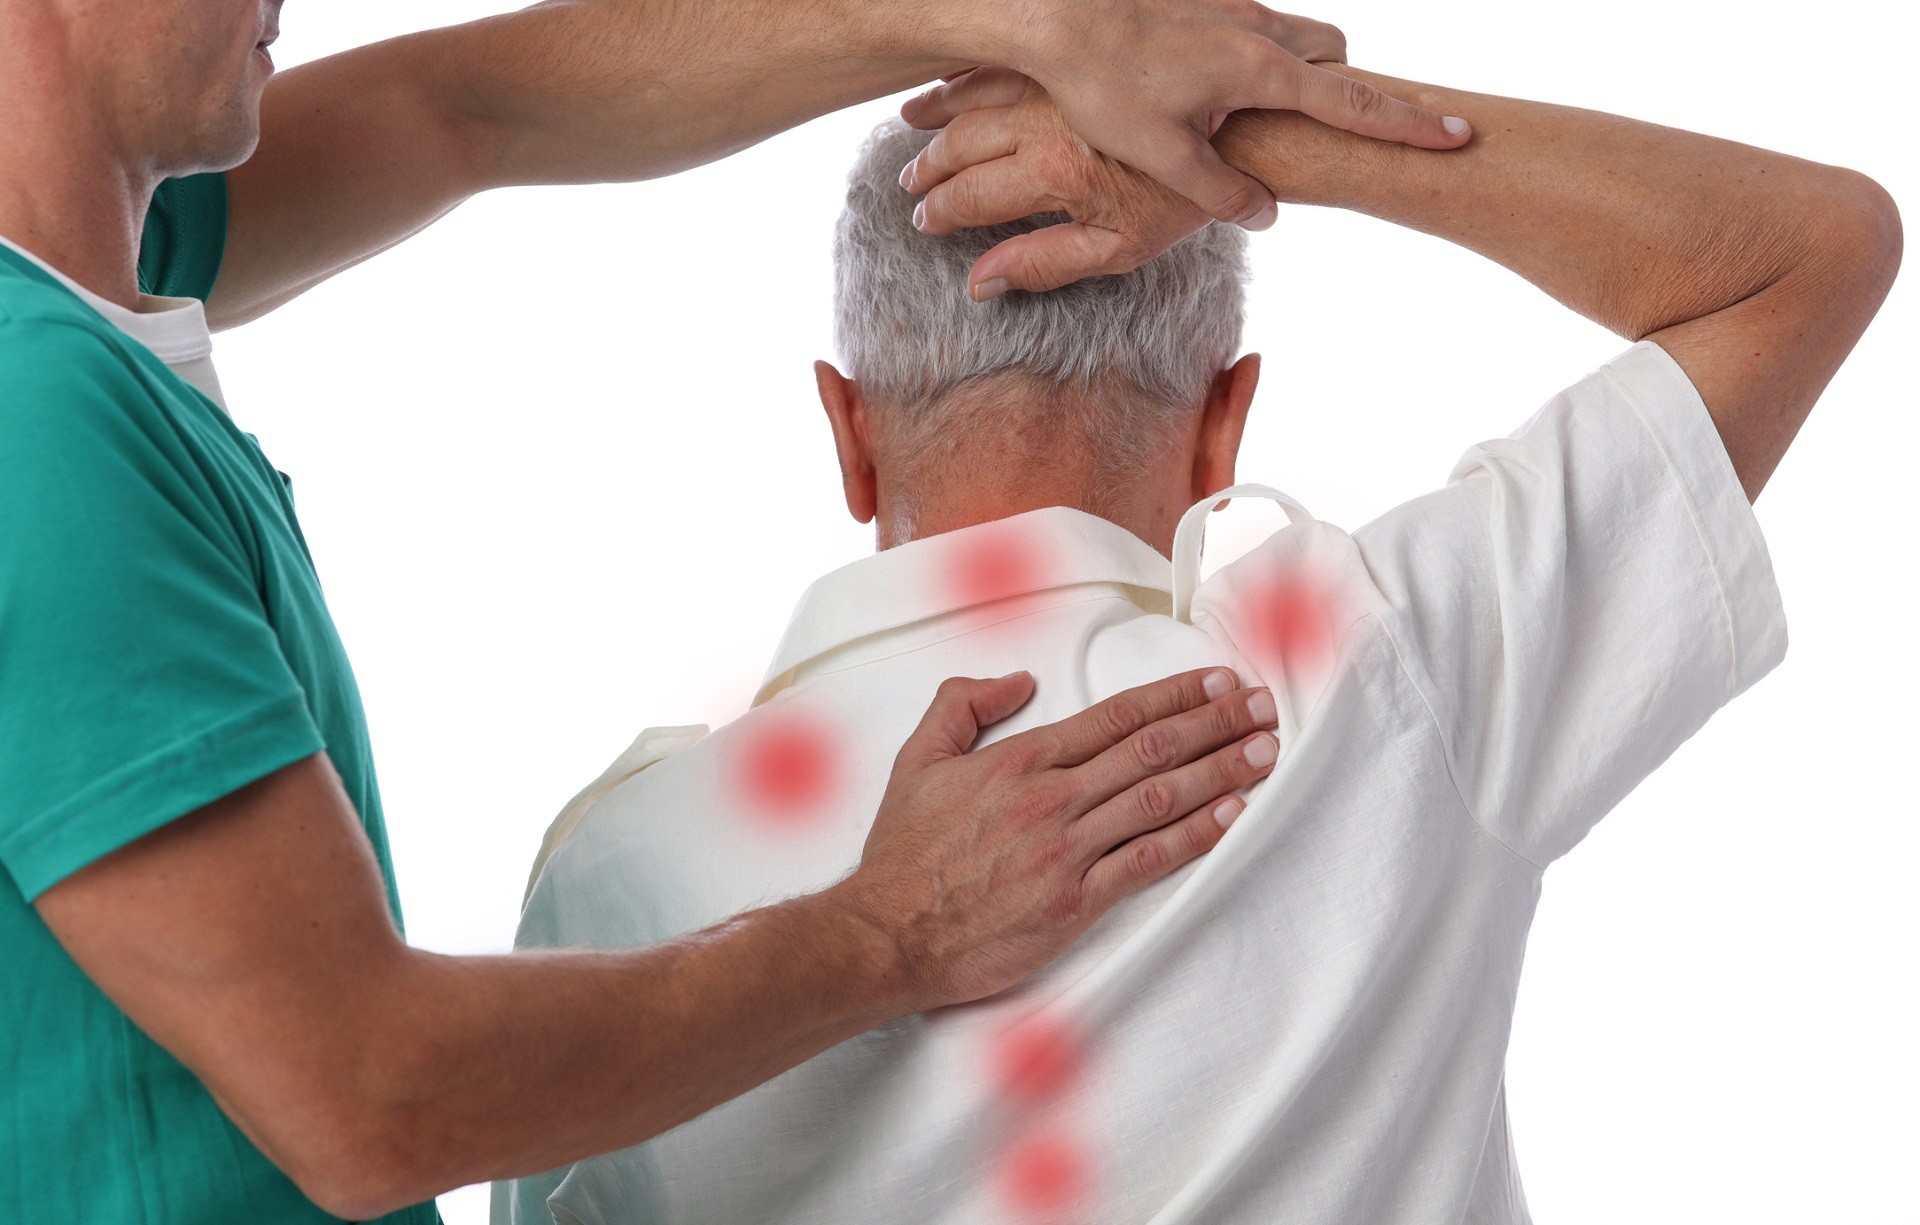 Trigger Point Therapy 101: What You Need to Know About This Powerful Pain Relief Technique